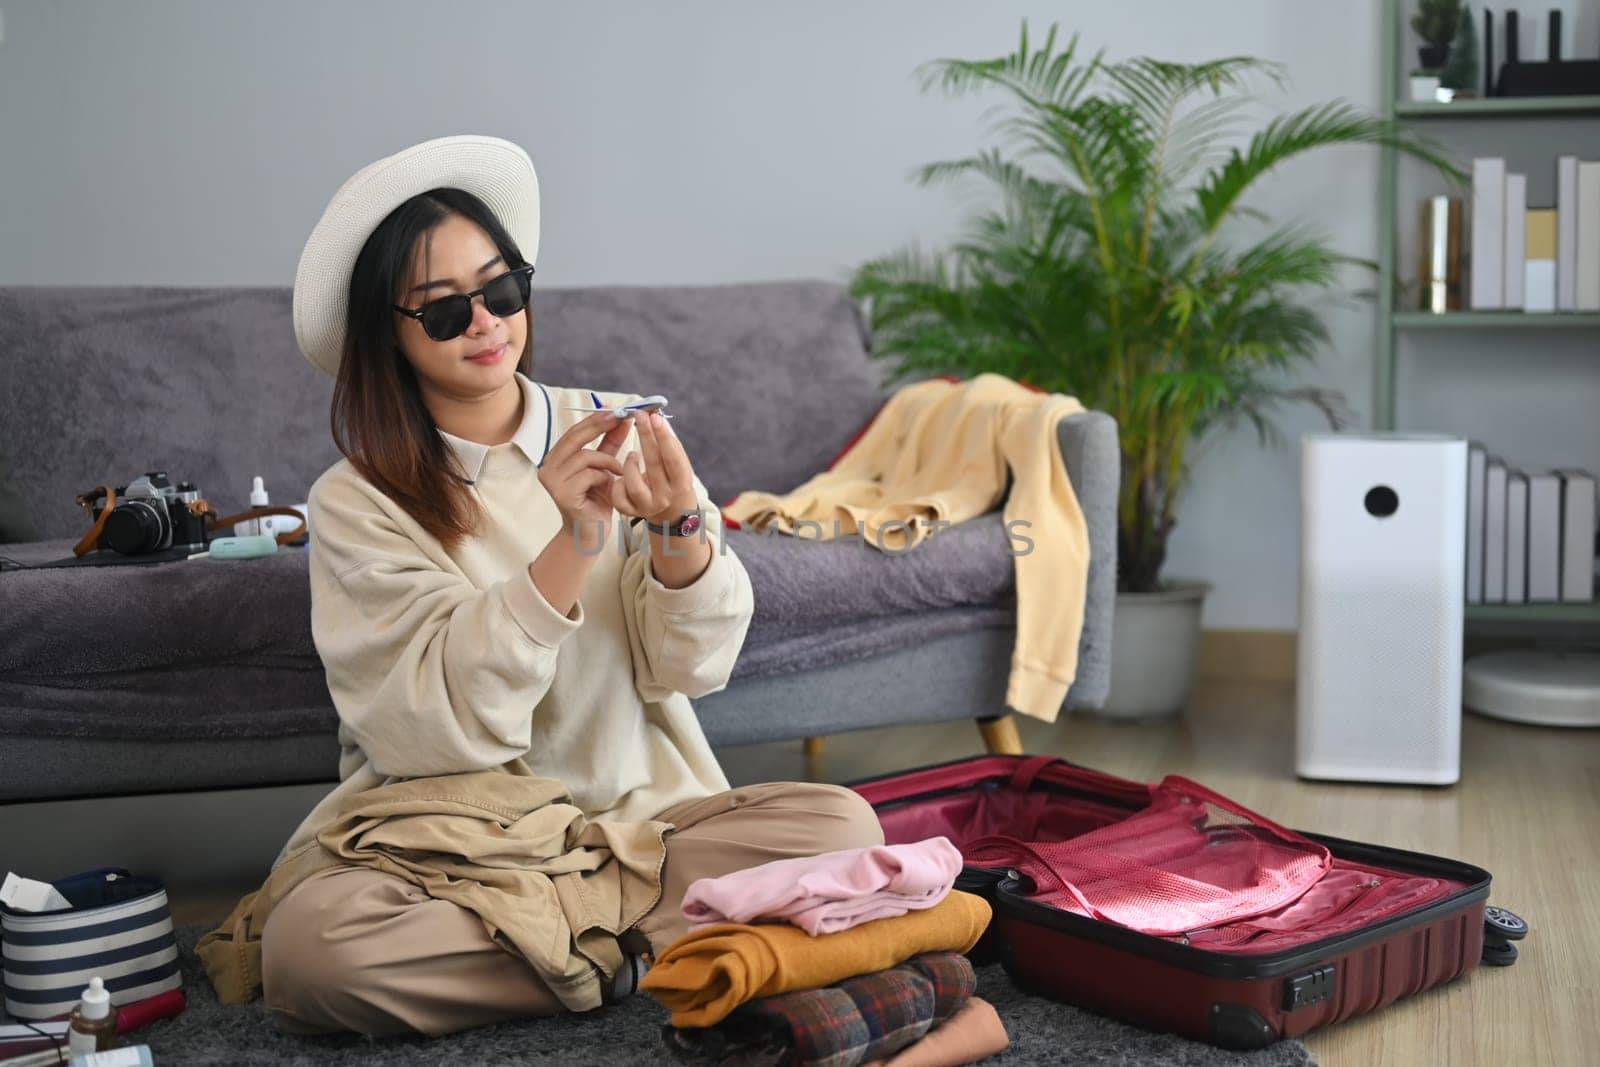 Happy woman traveler in sunglasses sitting on floor with suitcase hold airplane model in hands. Travel and vacation concept.